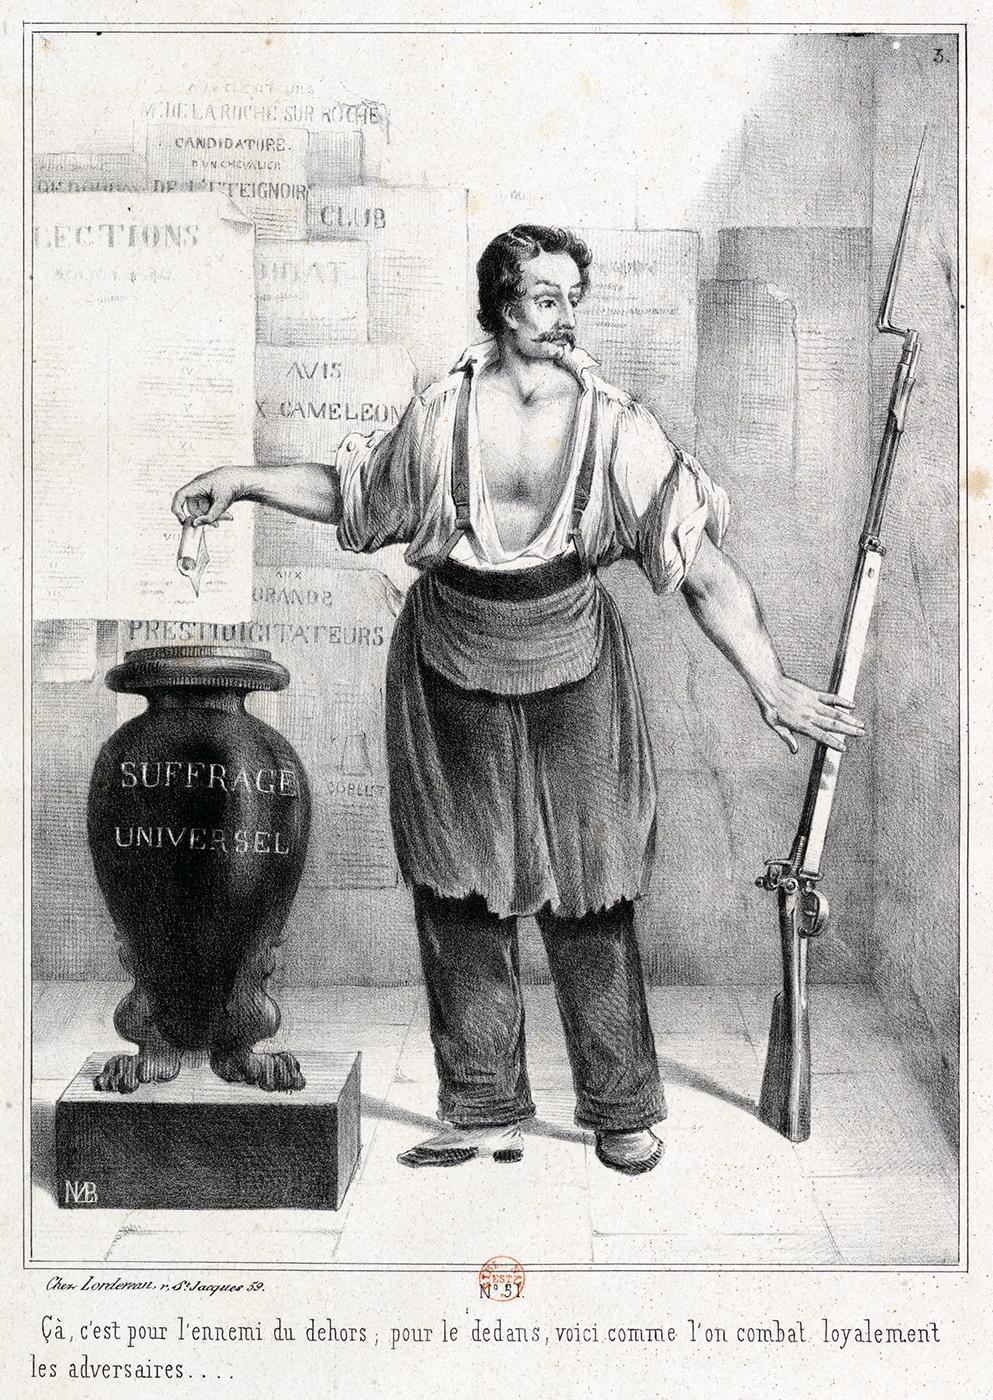 Drawing of a worker who is setting down a gun in favor of placing a vote into an urn labeled "Suffrage universe; [universal suffrage]"